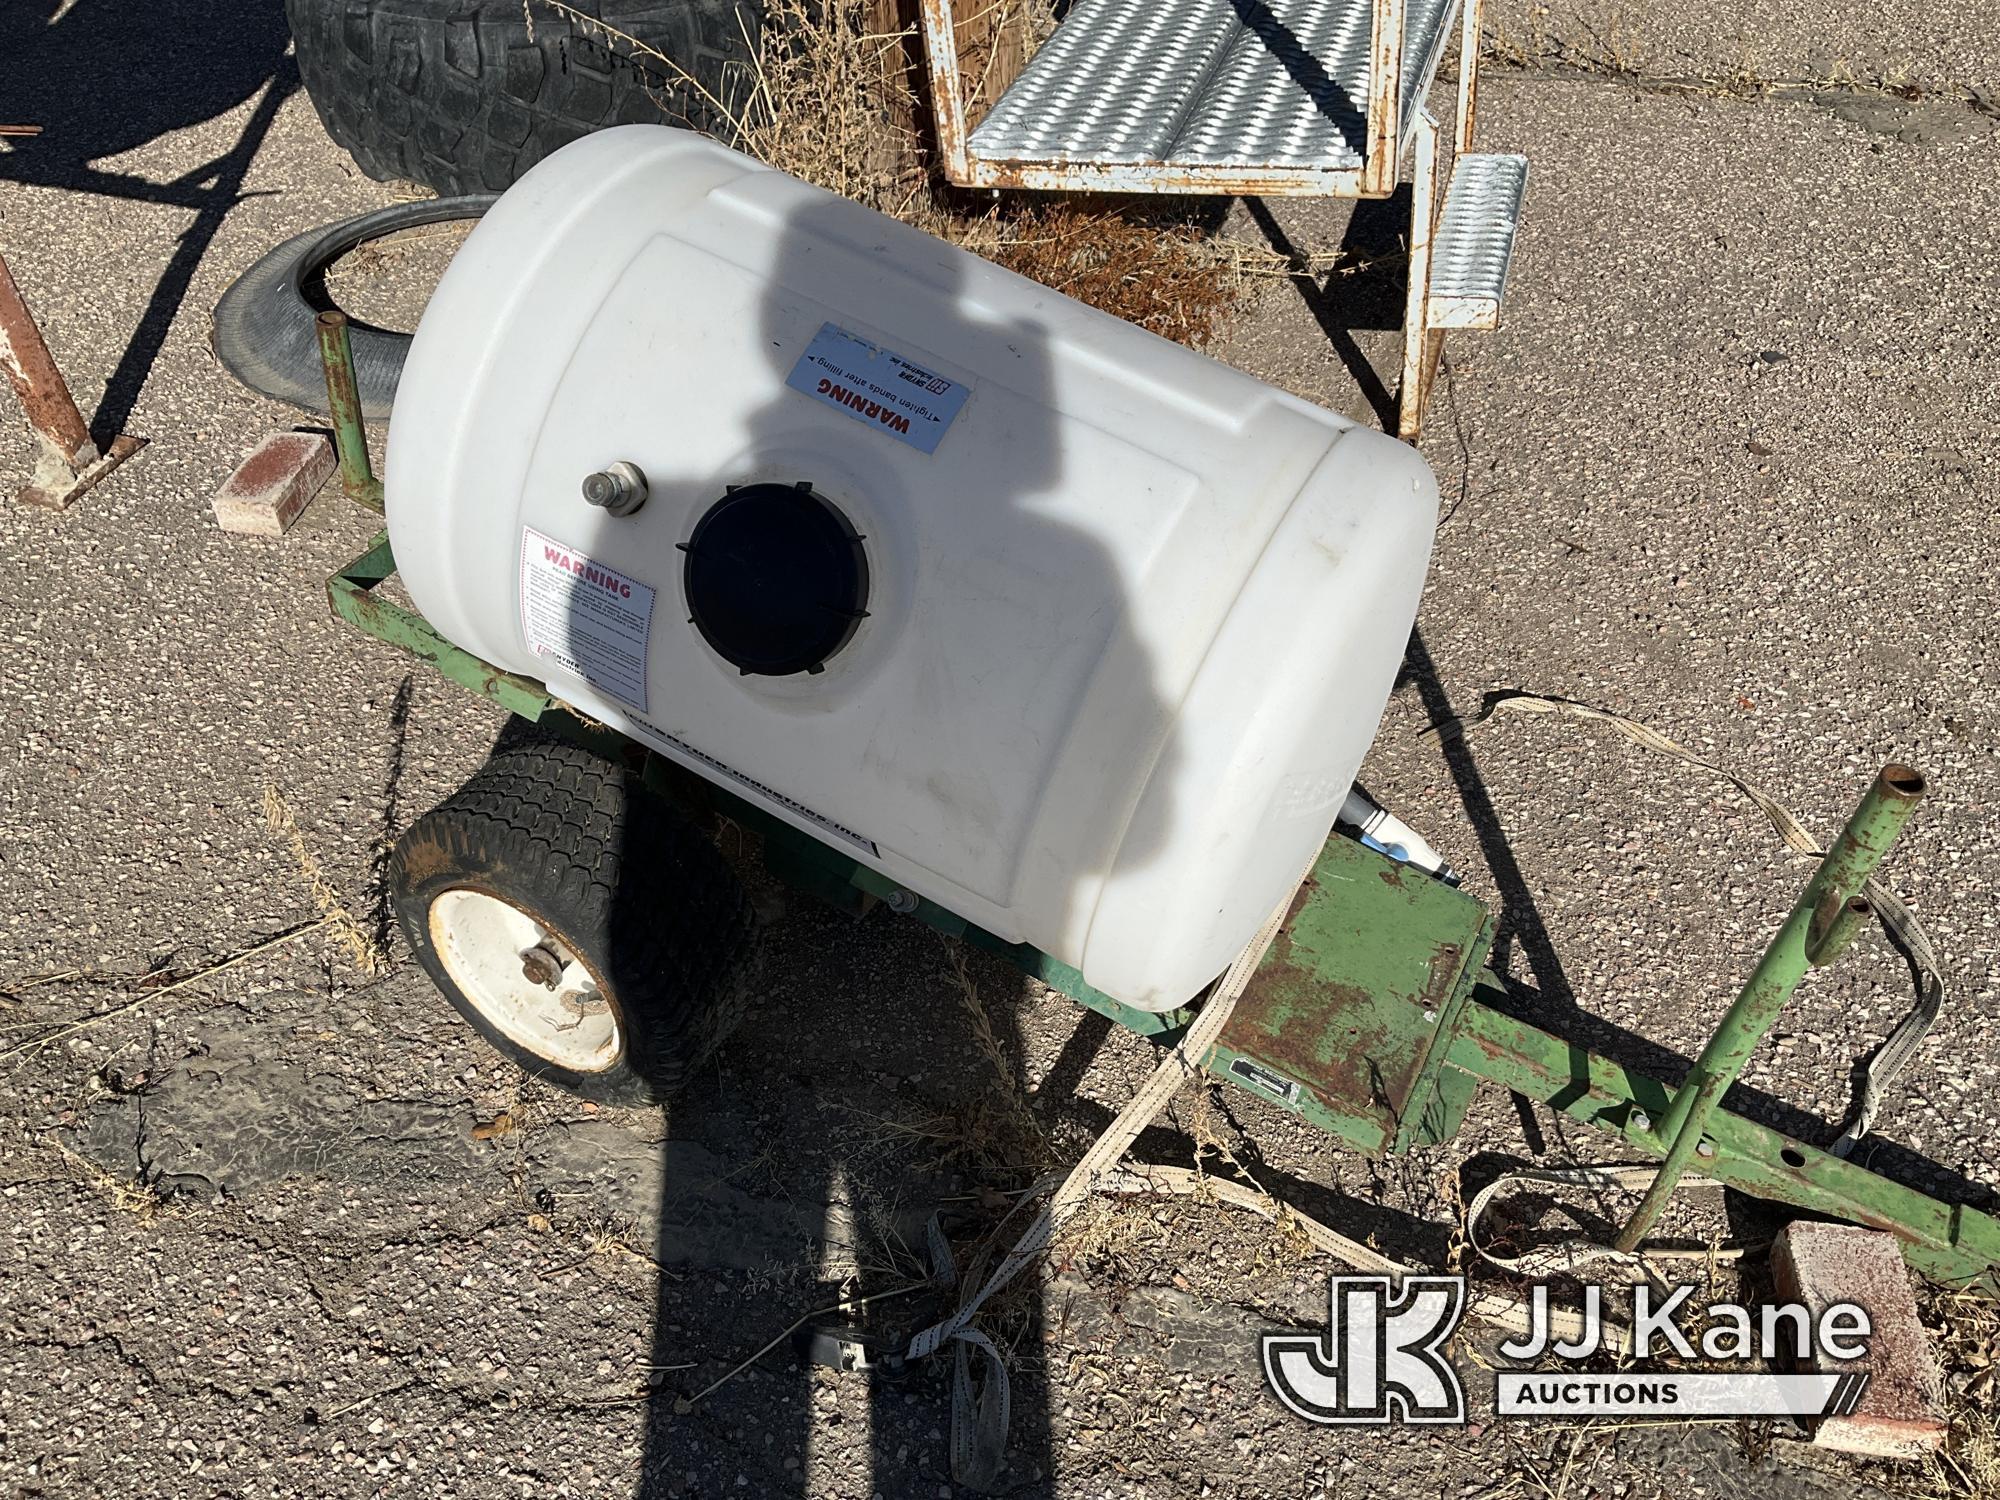 (Fountain, CO) Mackissic Mighty Mac 50gal Electric Sprayer (Operates) NOTE: This unit is being sold